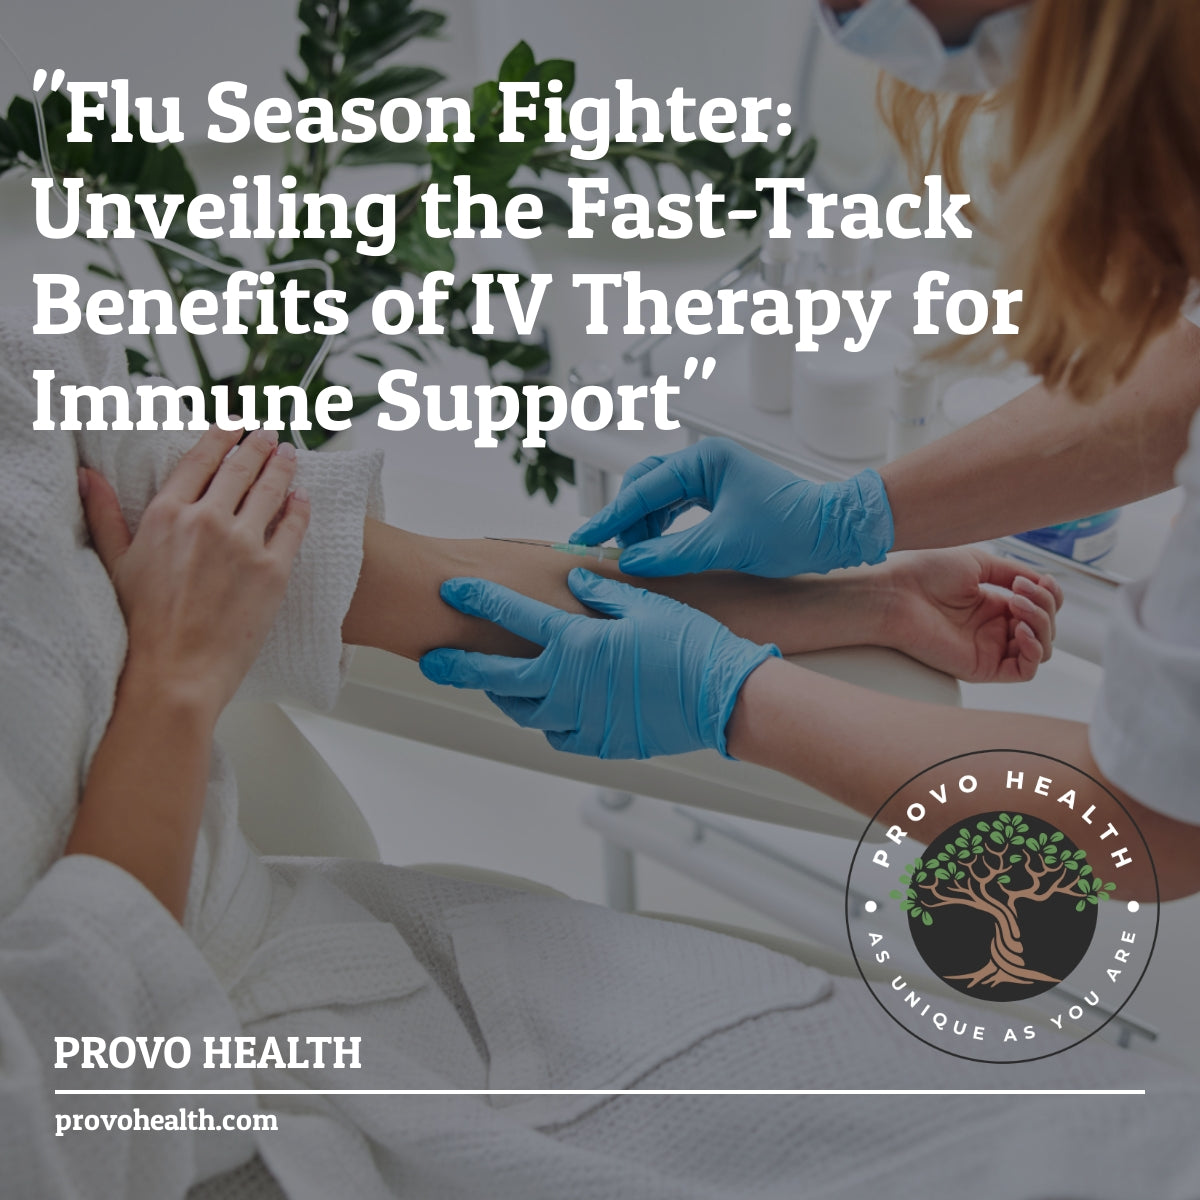 "Flu Season Fighter: Unveiling the Fast-Track Benefits of IV Therapy for Immune Support"